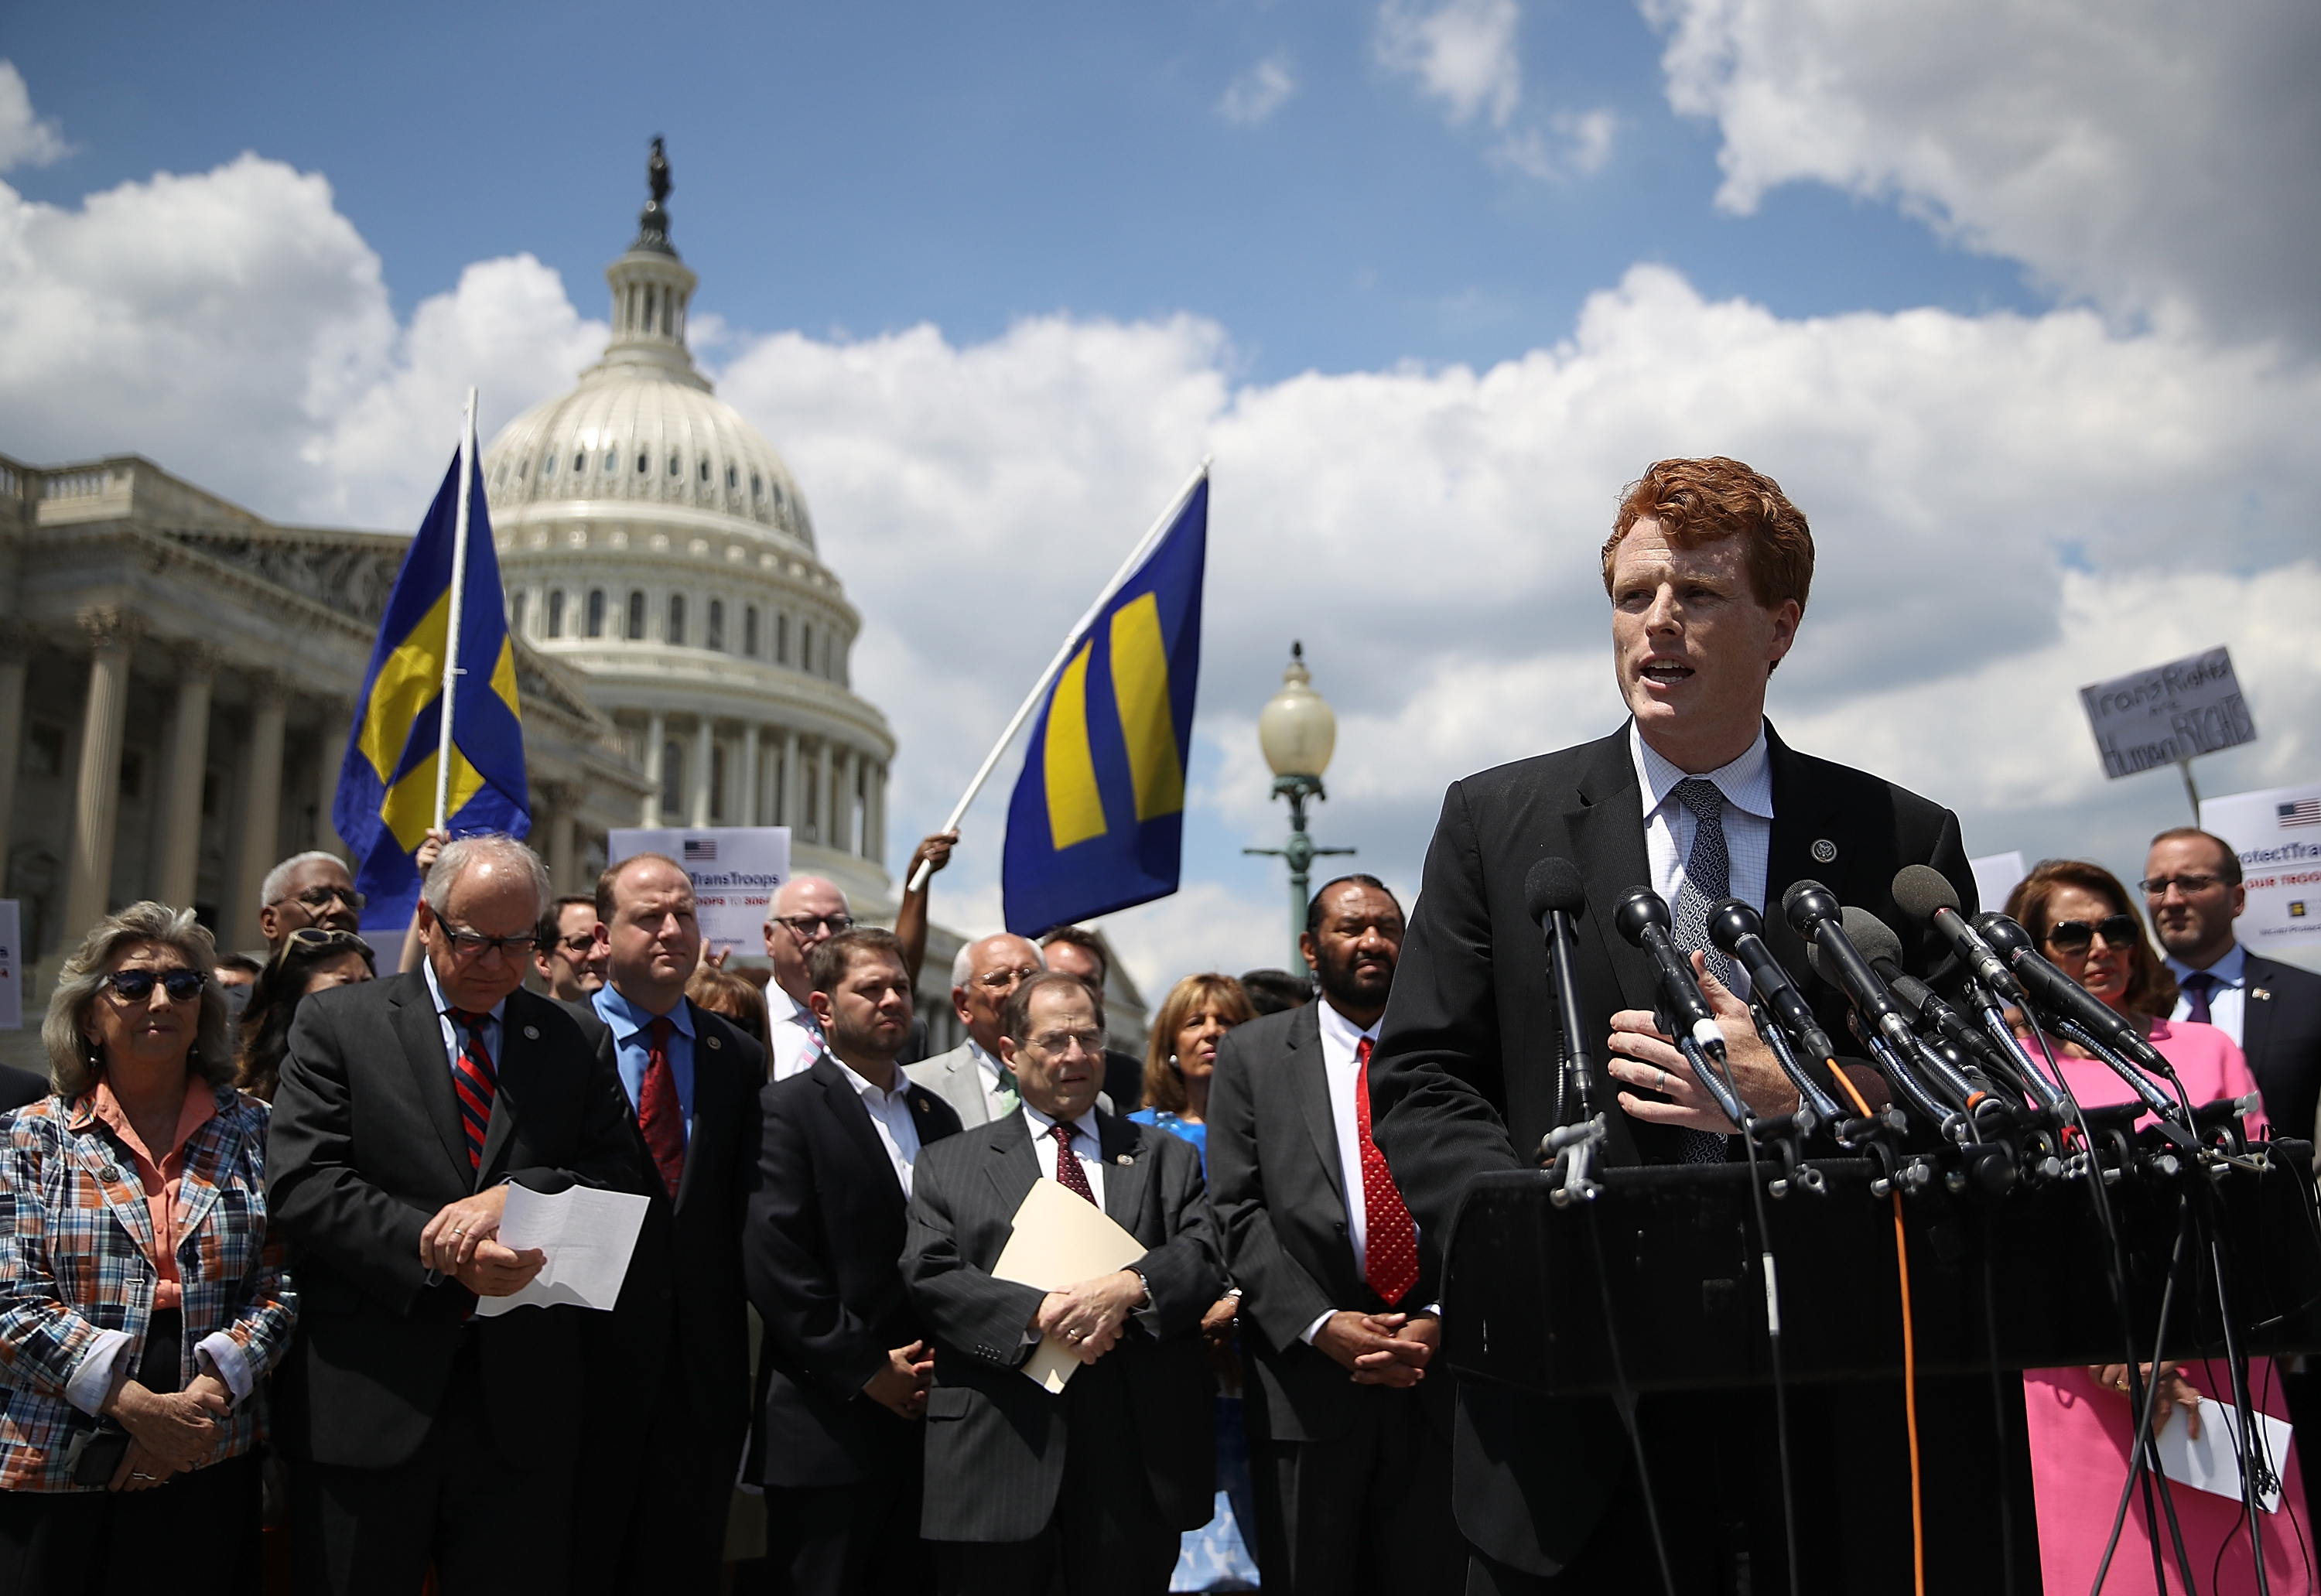 WASHINGTON, DC - JULY 26: U.S. Rep. Joe Kennedy (D-MA) speaks during a press conference condemning the new ban on transgendered servicemembers on July 26, 2017 in Washington, DC. U.S. Rep. Joe Kennedy held a news conference with members of the House leadership and the LGBT Equality Caucus to denounce the decision by U.S. President Donald Trump to ban transgendered servicemembers. (Photo by Justin Sullivan/Getty Images)